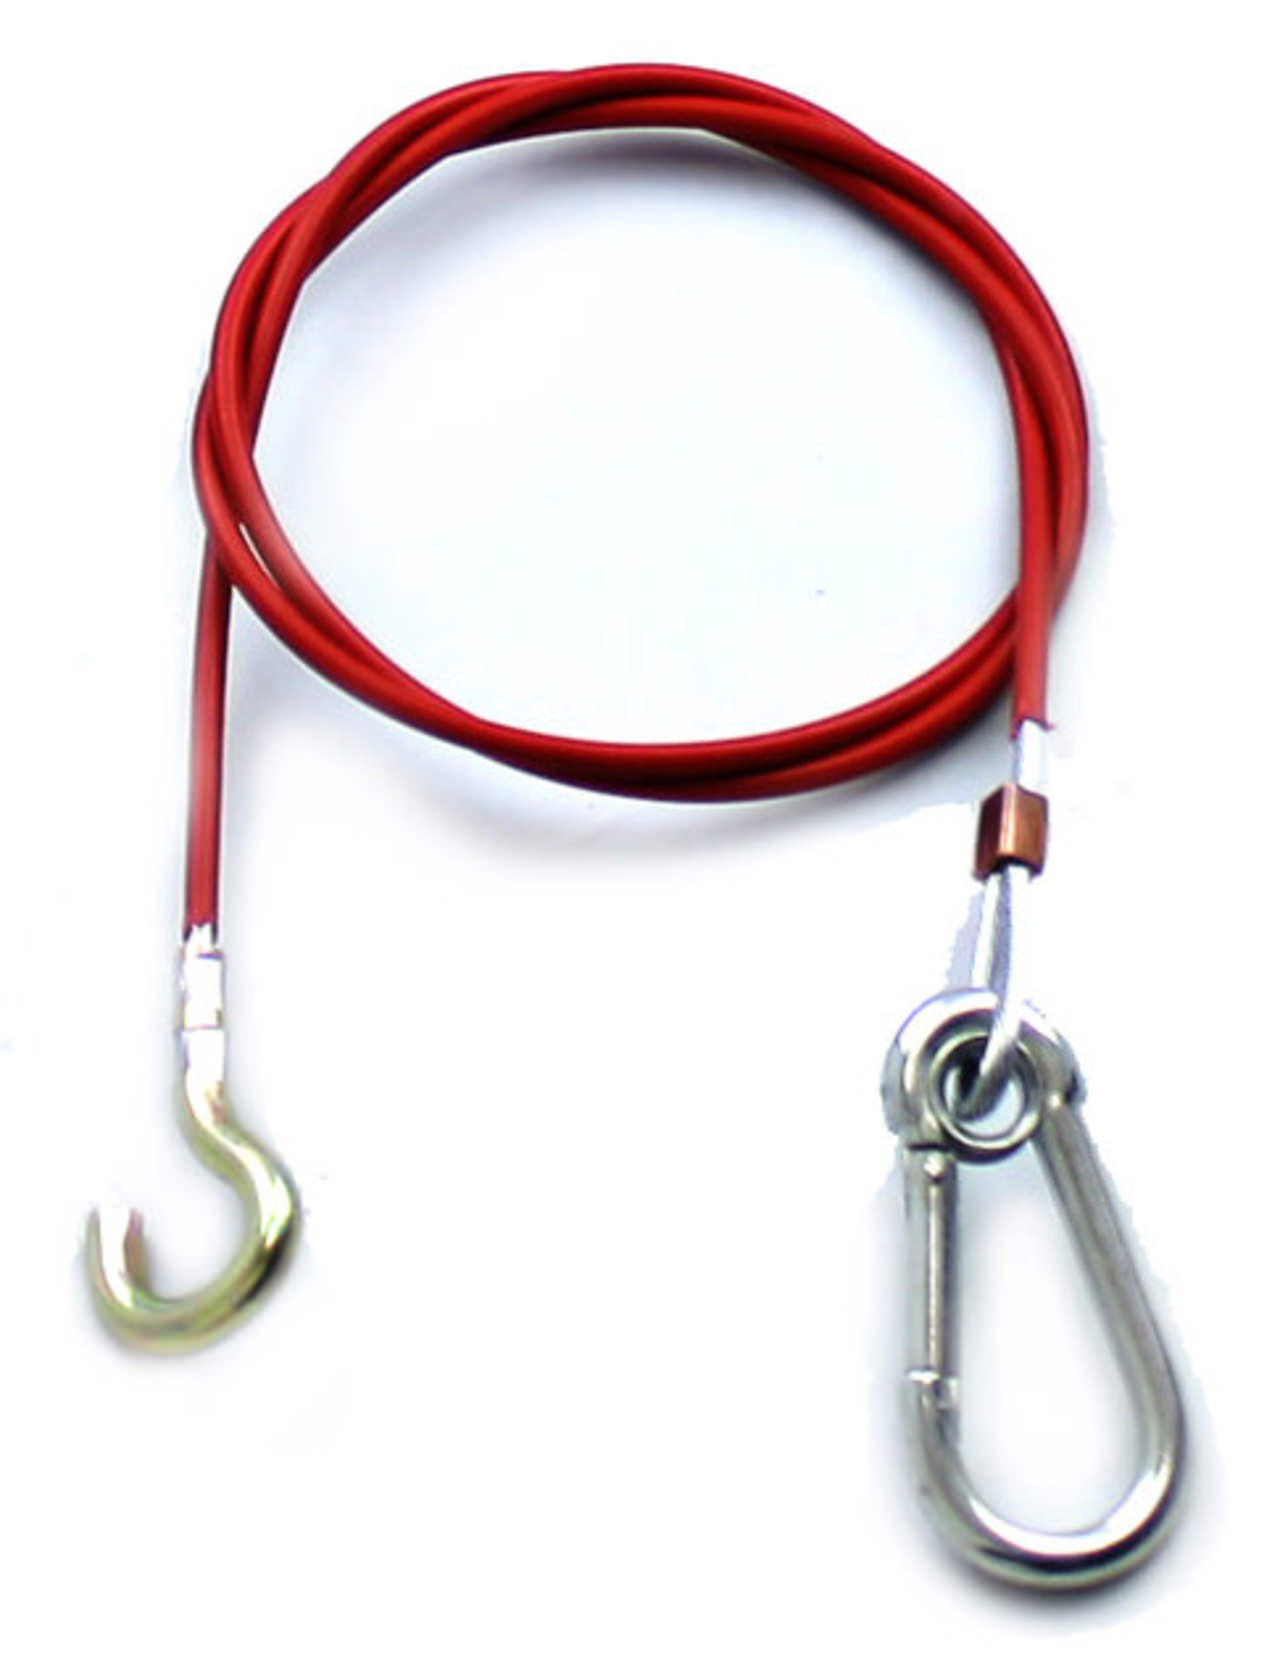 Quality Trailer & Caravan Breakaway Cable with Split Ring 1m x 3mm PVC Red 